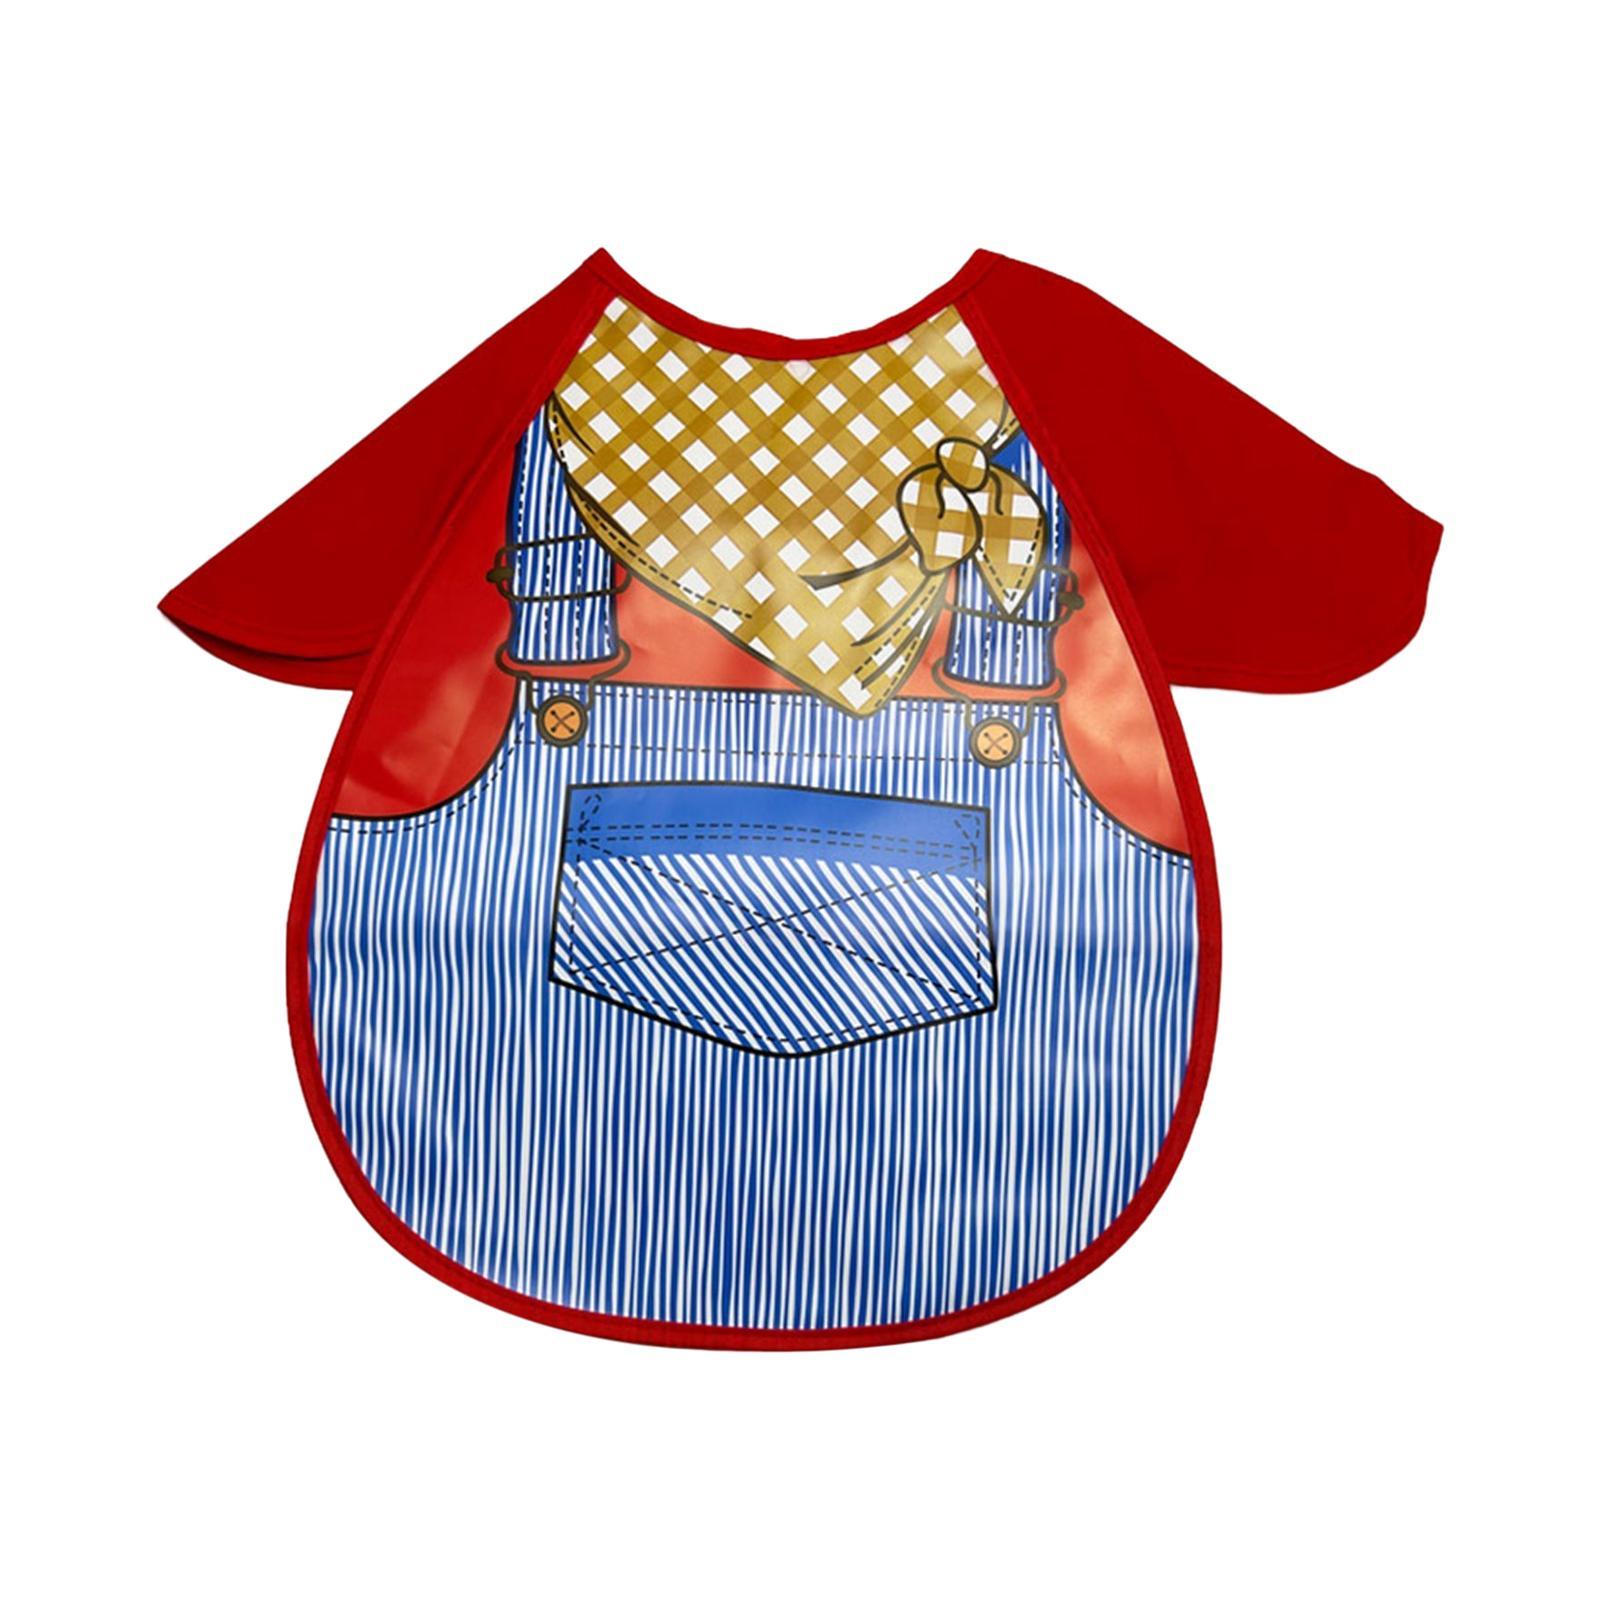 Short Sleeve Baby Bib Eating Travel Washable for Ages 1-5 Years